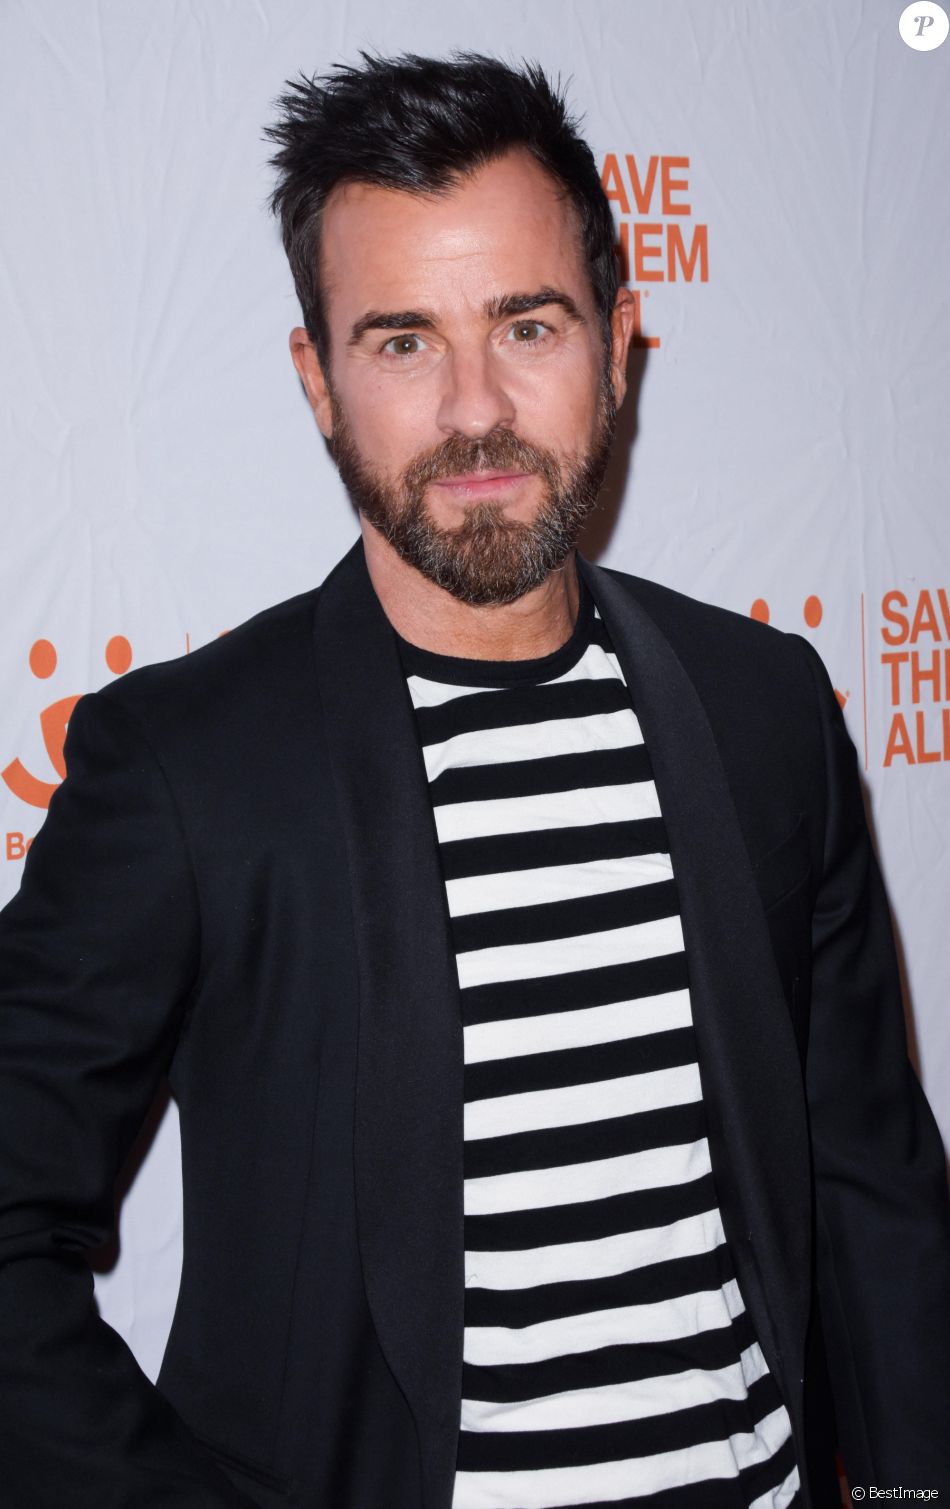 https://static1.purepeople.com/articles/0/36/31/40/@/5230748-justin-theroux-4e-gala-annuel-best-fr-950x0-2.jpg